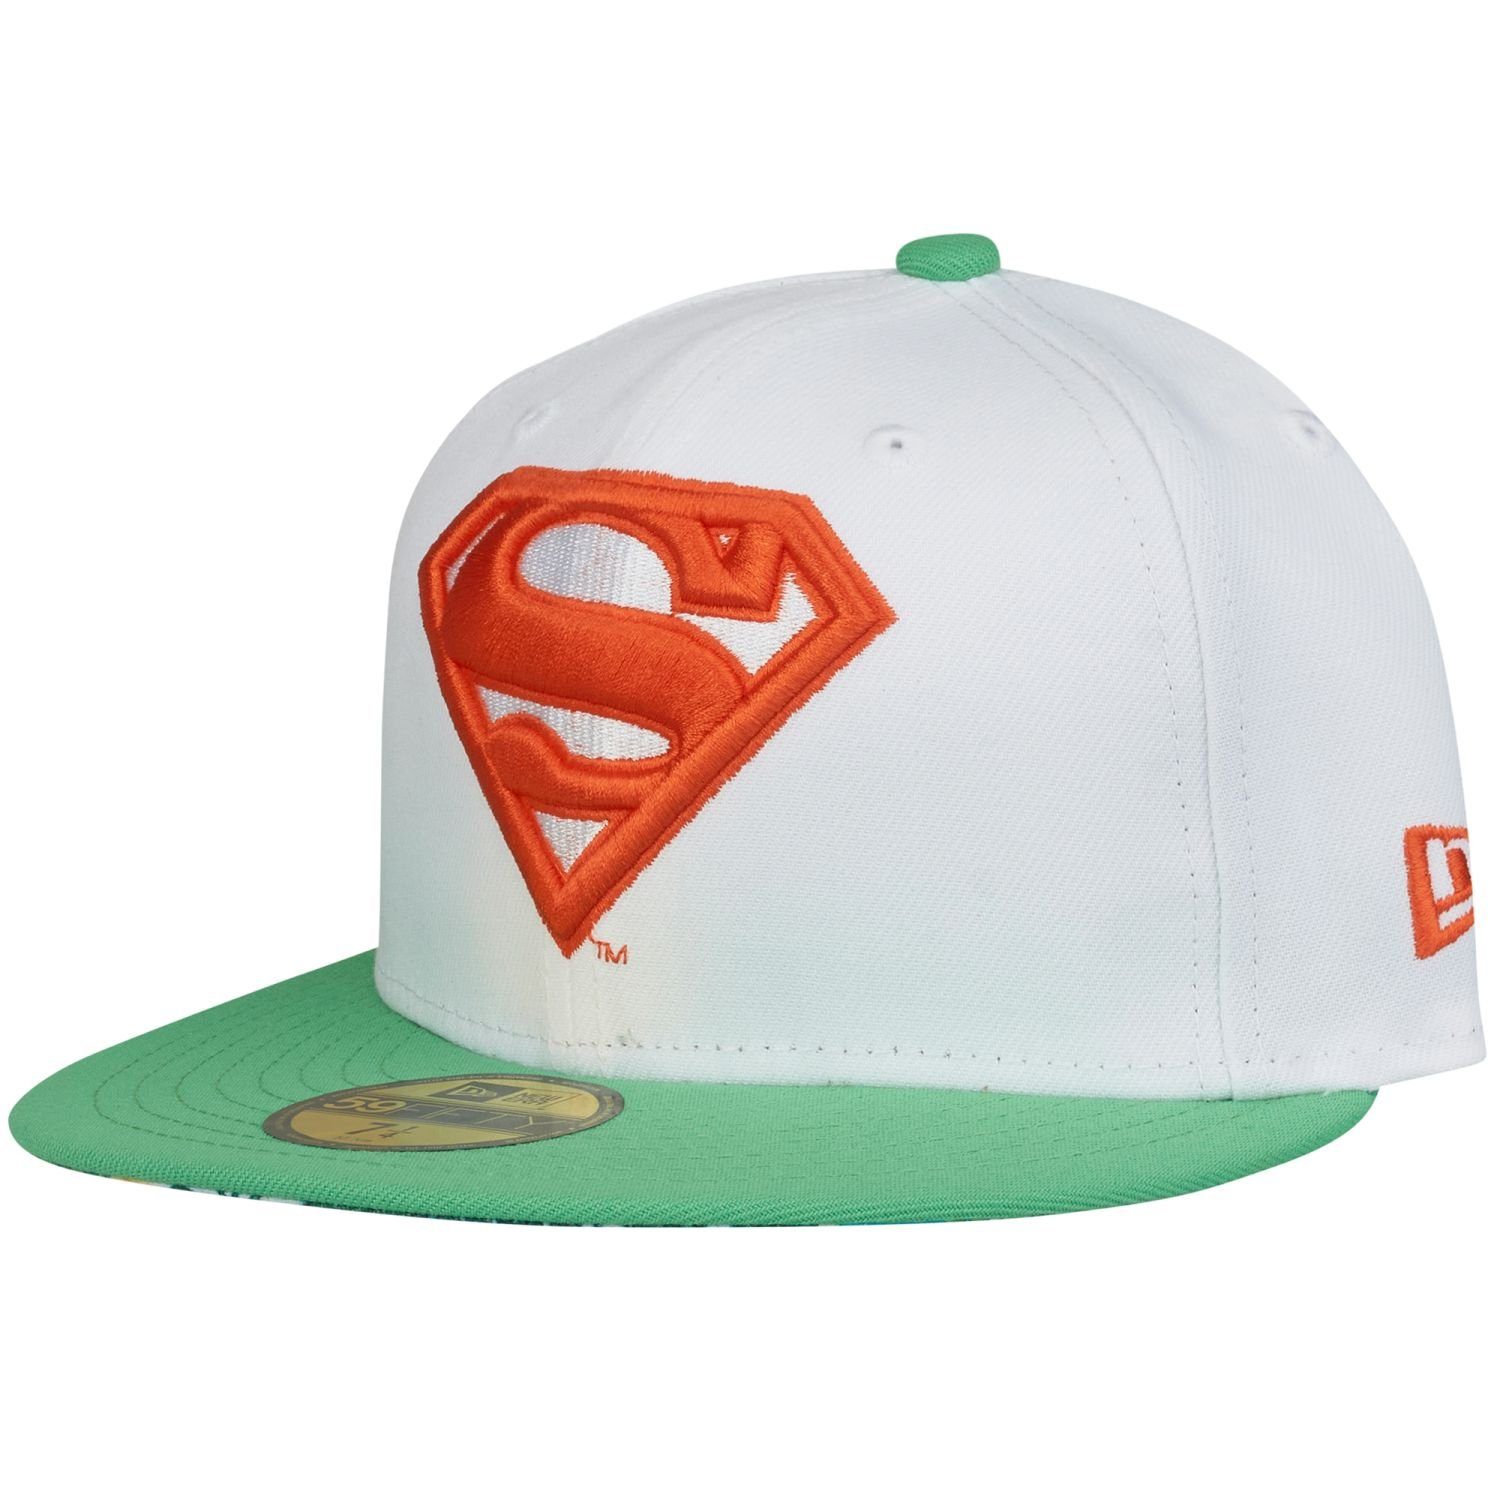 New Era Fitted Cap 59Fifty ISLAND FLORAL Superman